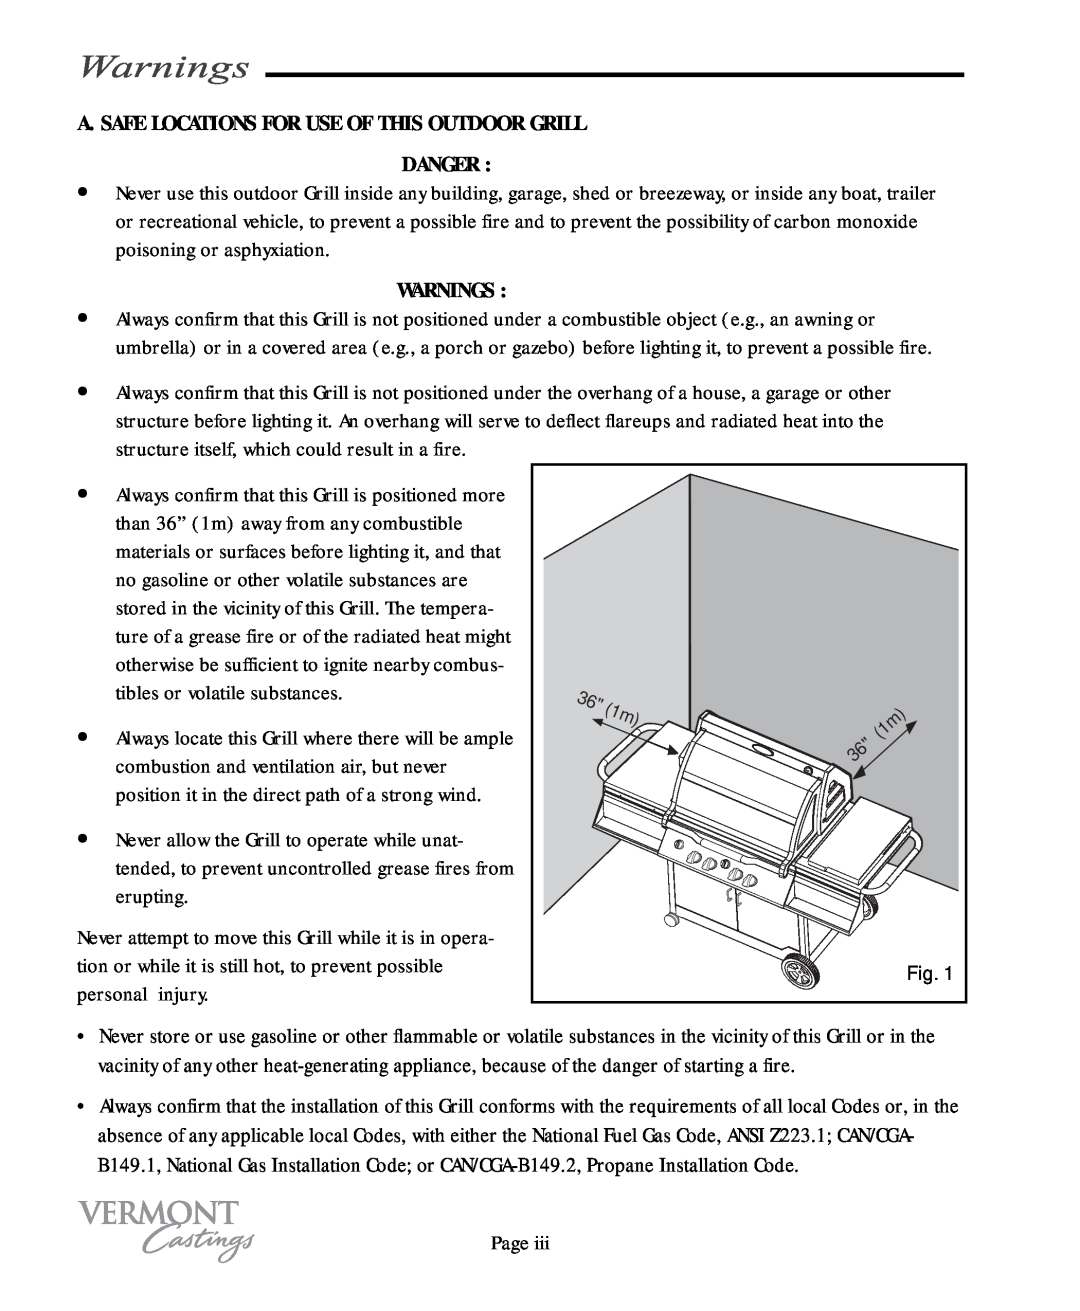 Vermont Casting VC200, VC400 user manual Warnings, A. Safe Locations For Use Of This Outdoor Grill Danger 